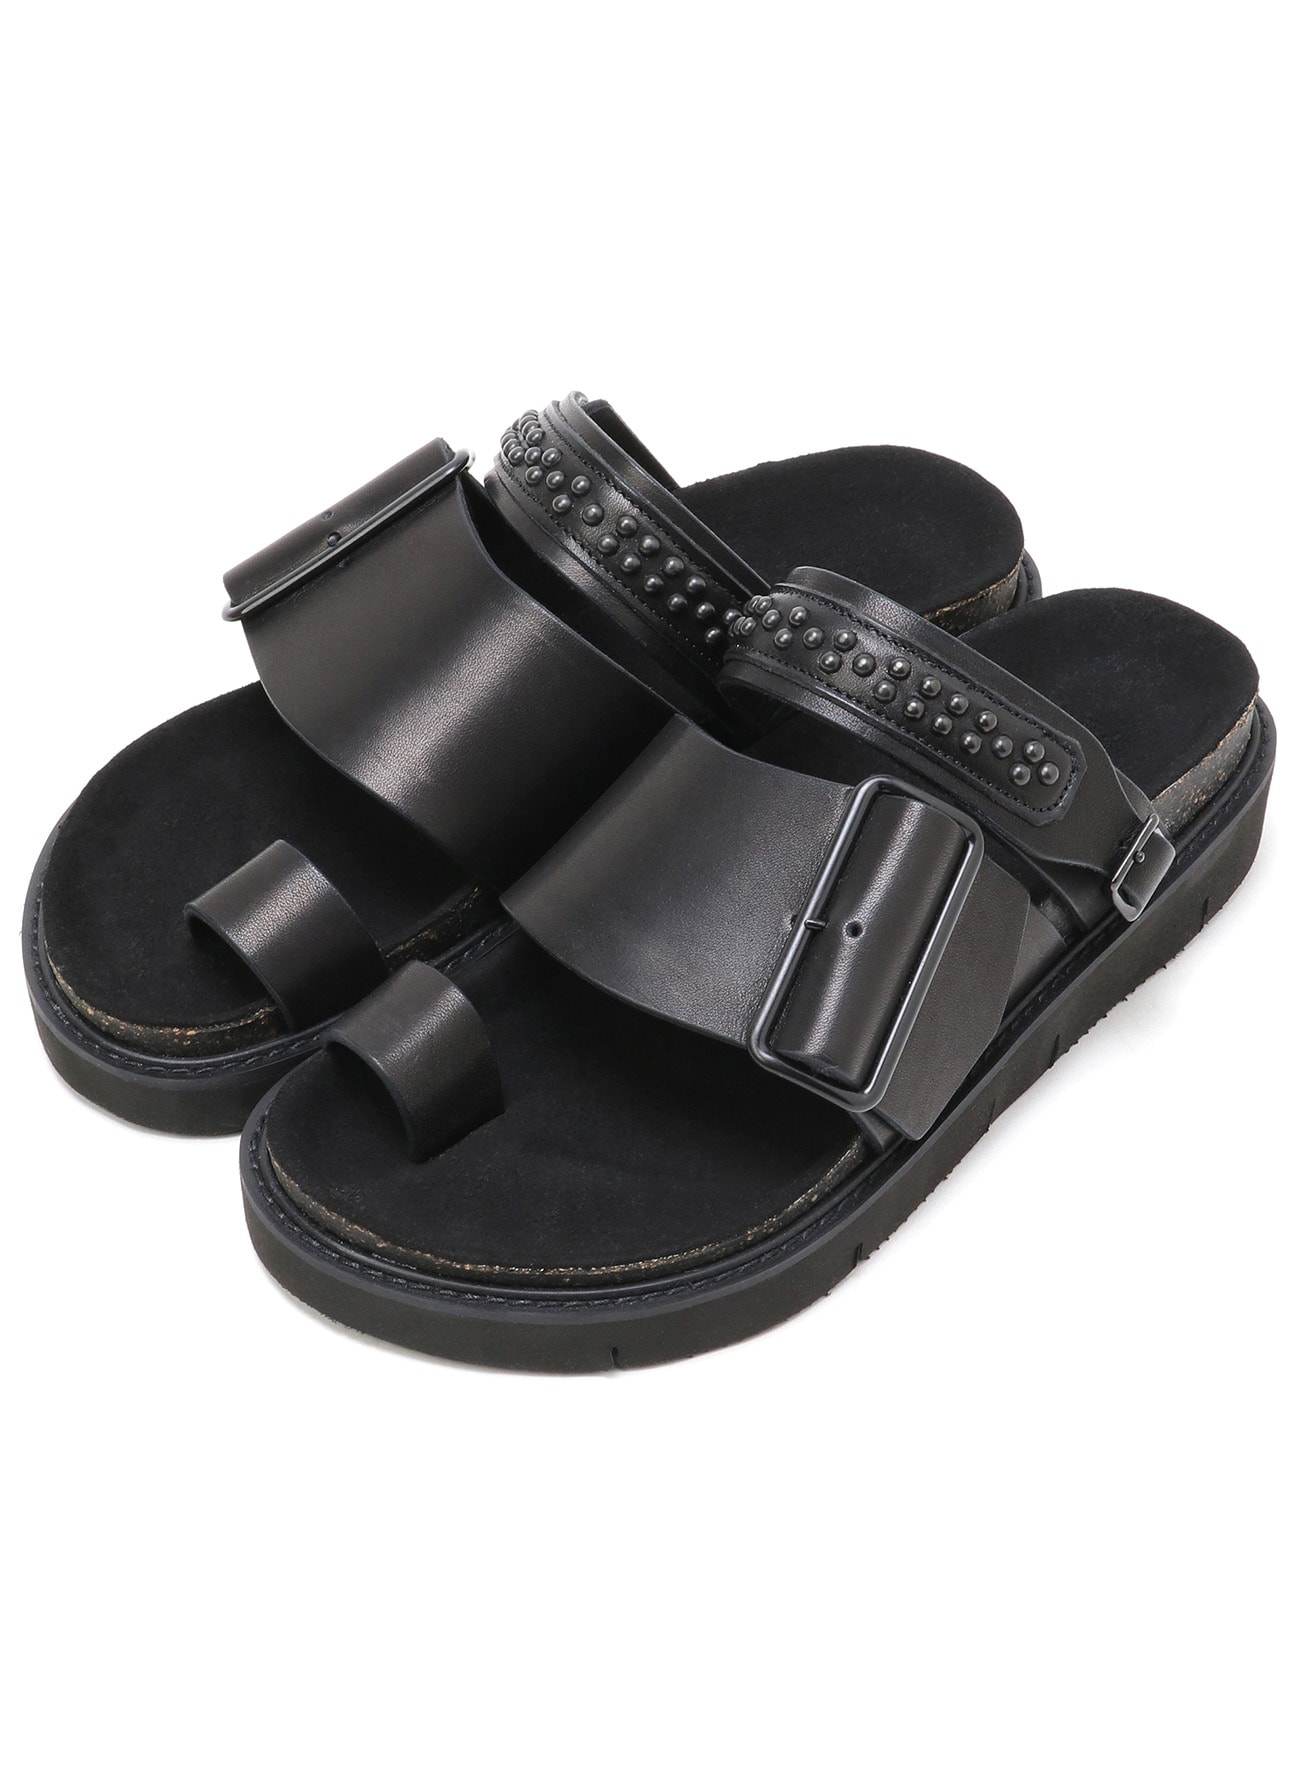 TANNED LEATHER STUDS SANDAL